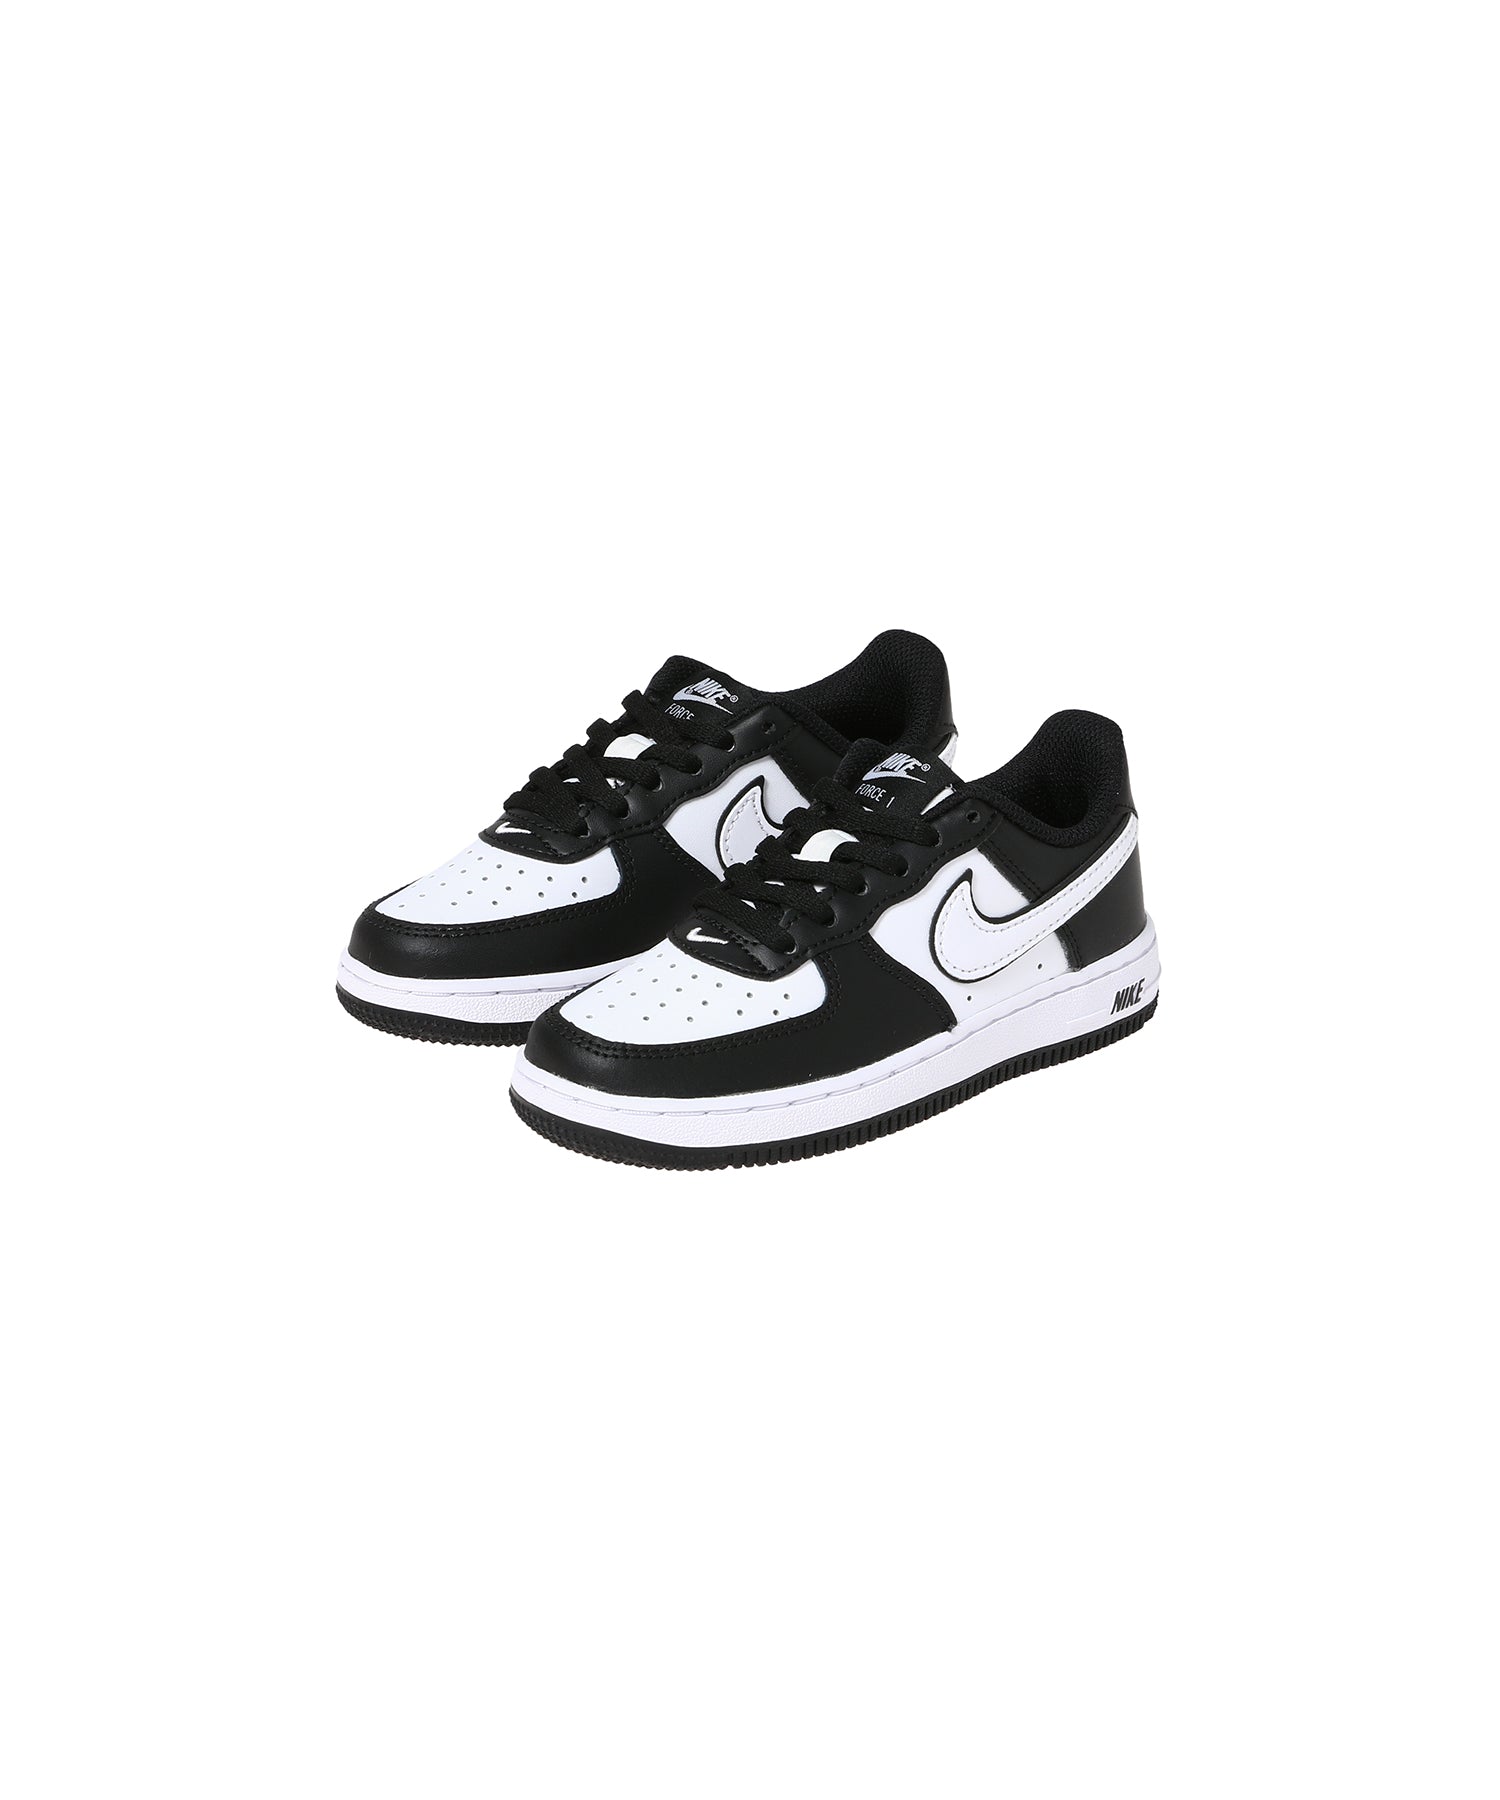 Nike Force 1 Lv8 2 Ps